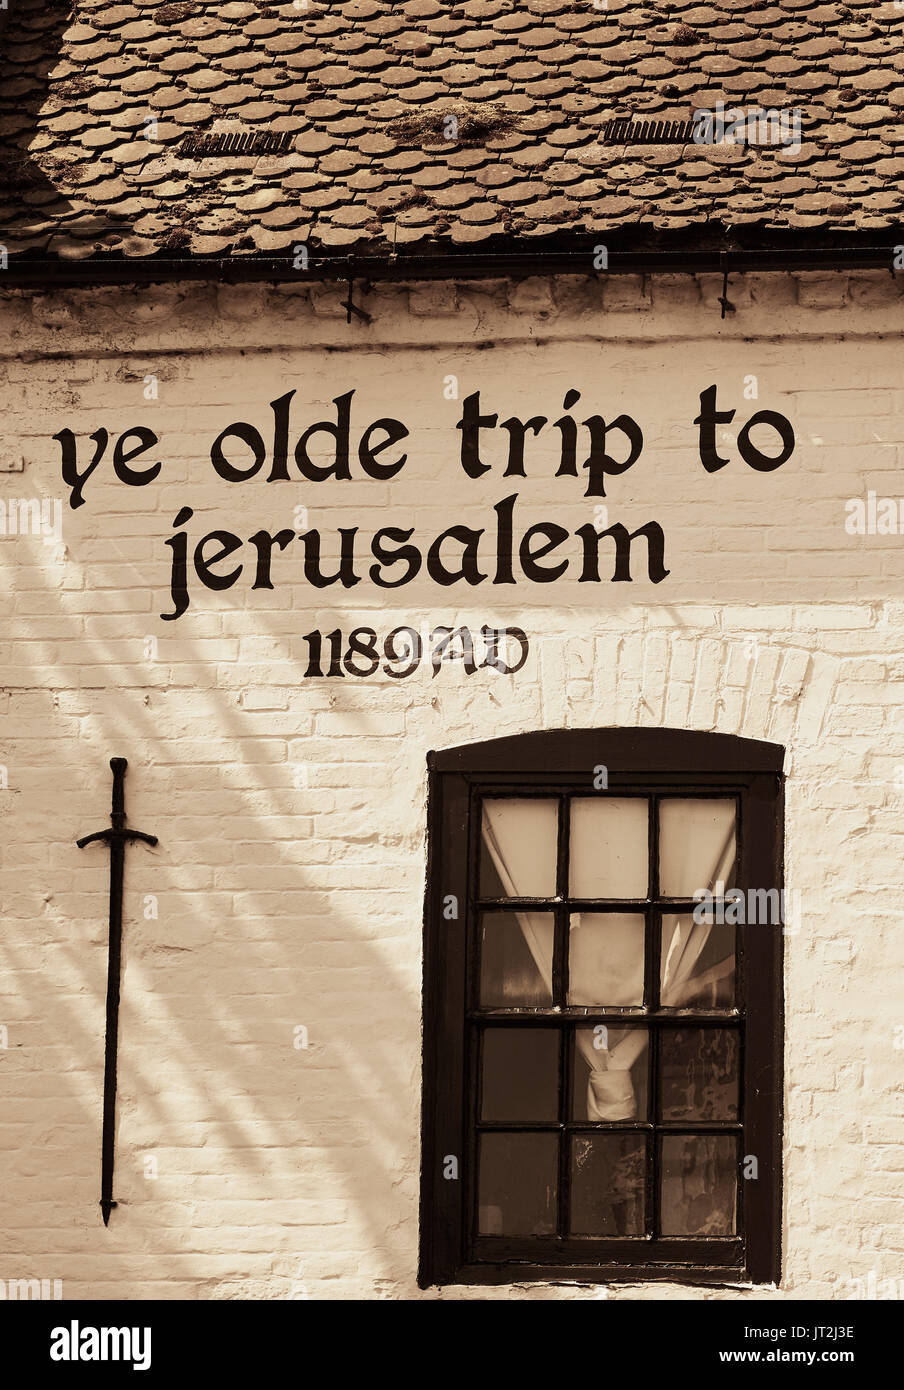 Ye Olde trip to Jerusalem, which claims to be the oldest pub in England,  Castle Rock, Nottingham, Nottinghamshire, east Midlands, England Stock Photo